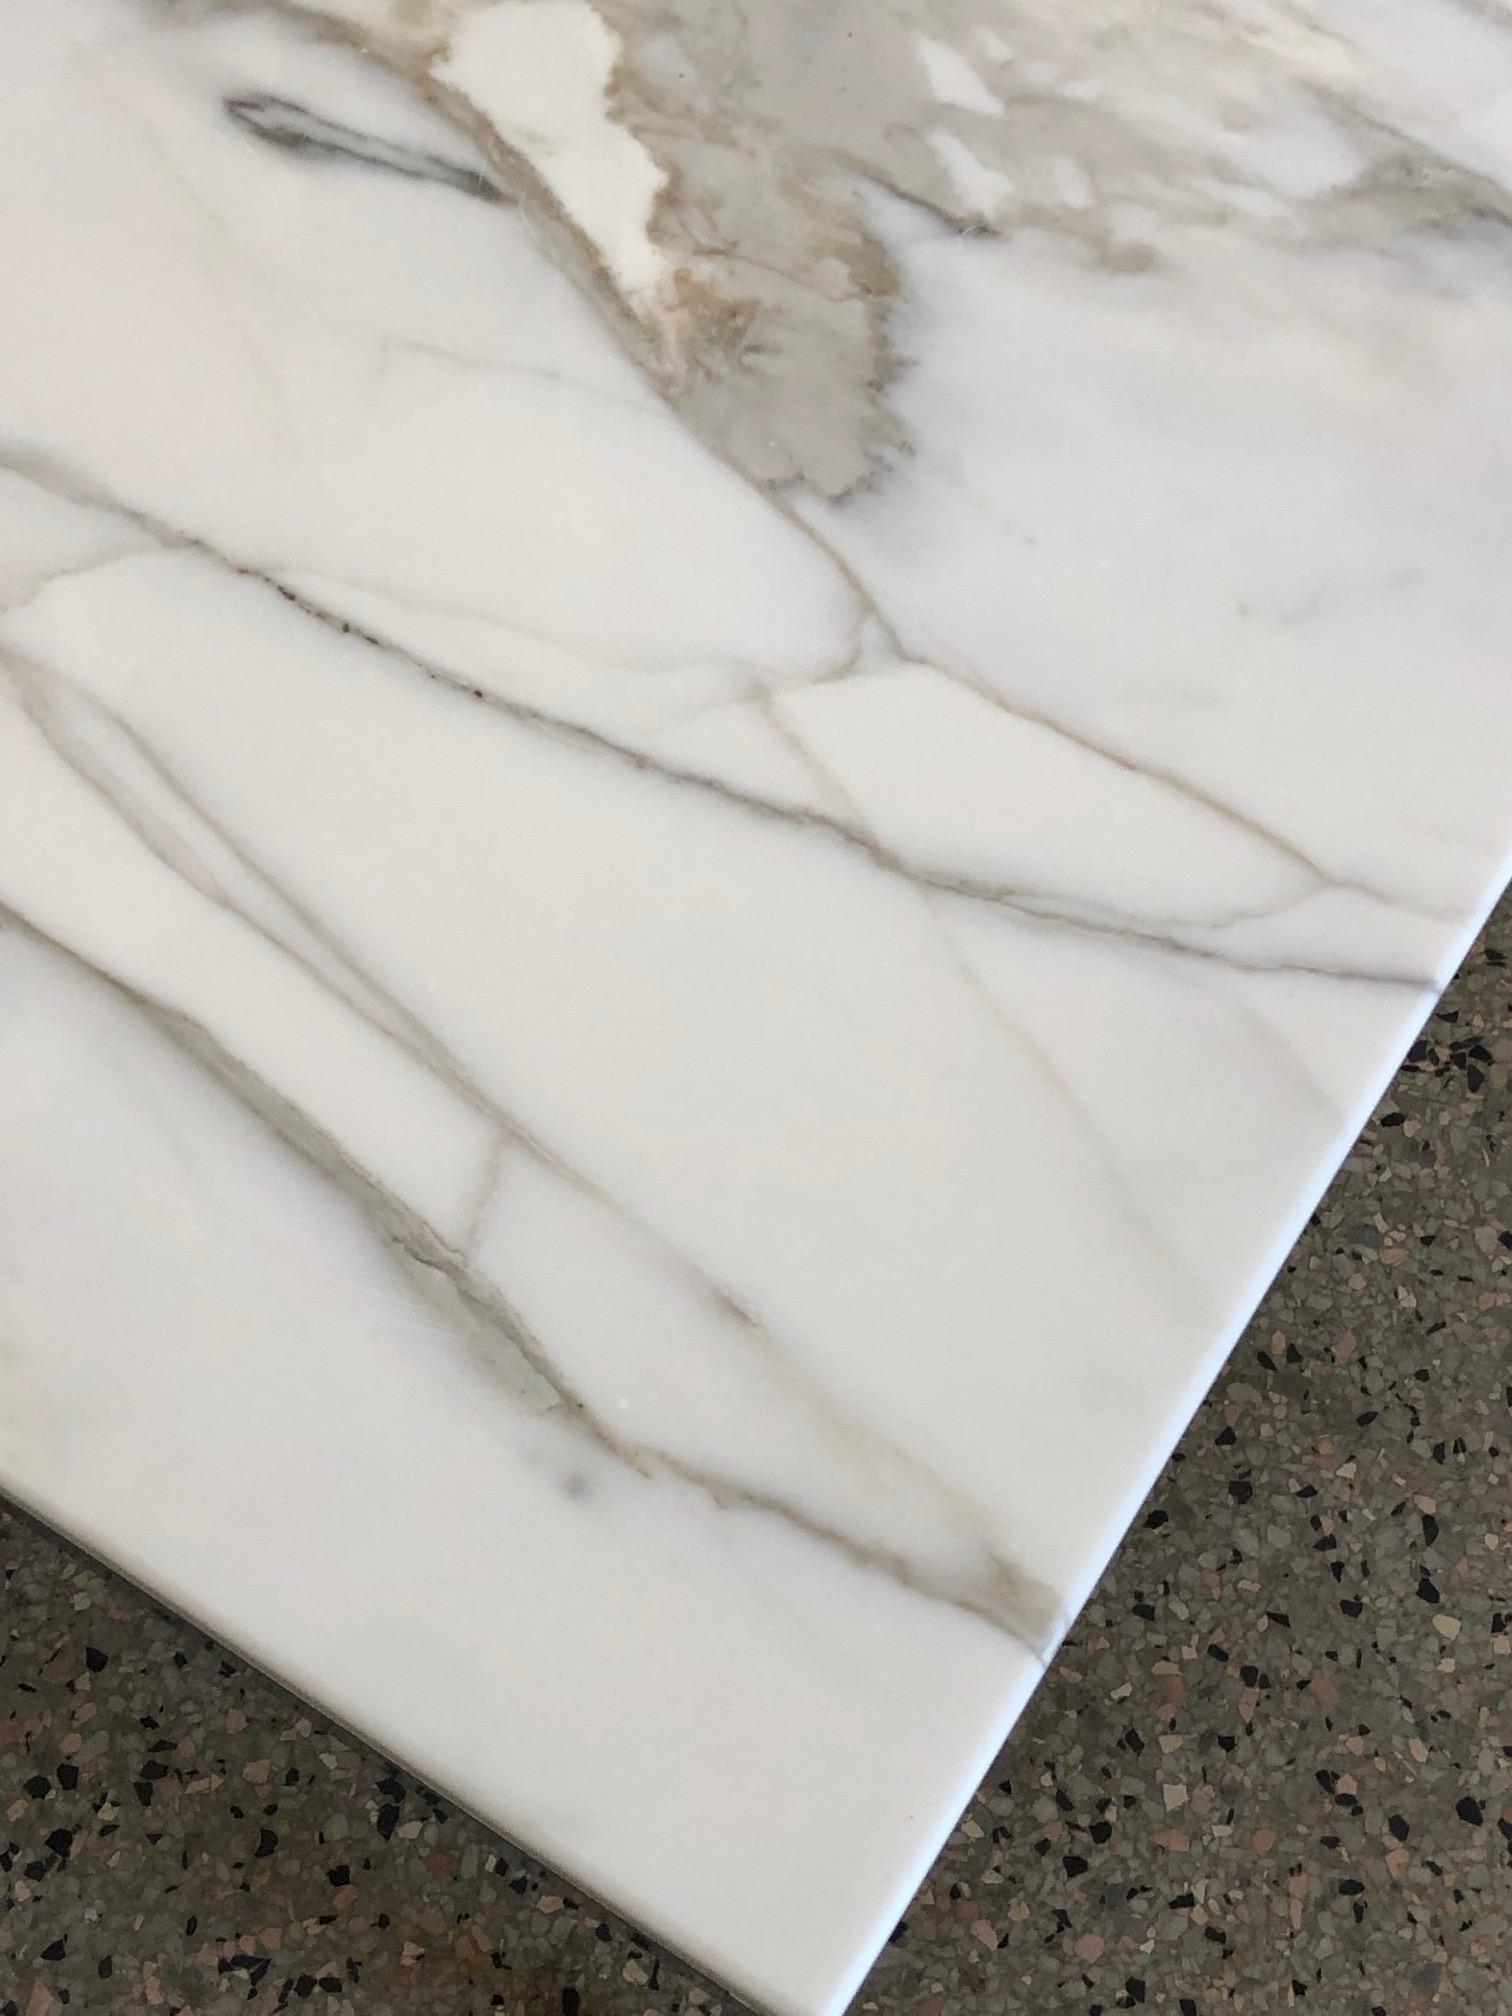 A classic Knoll Carrara marble occasional table. Measures: 27 x 27 x 17